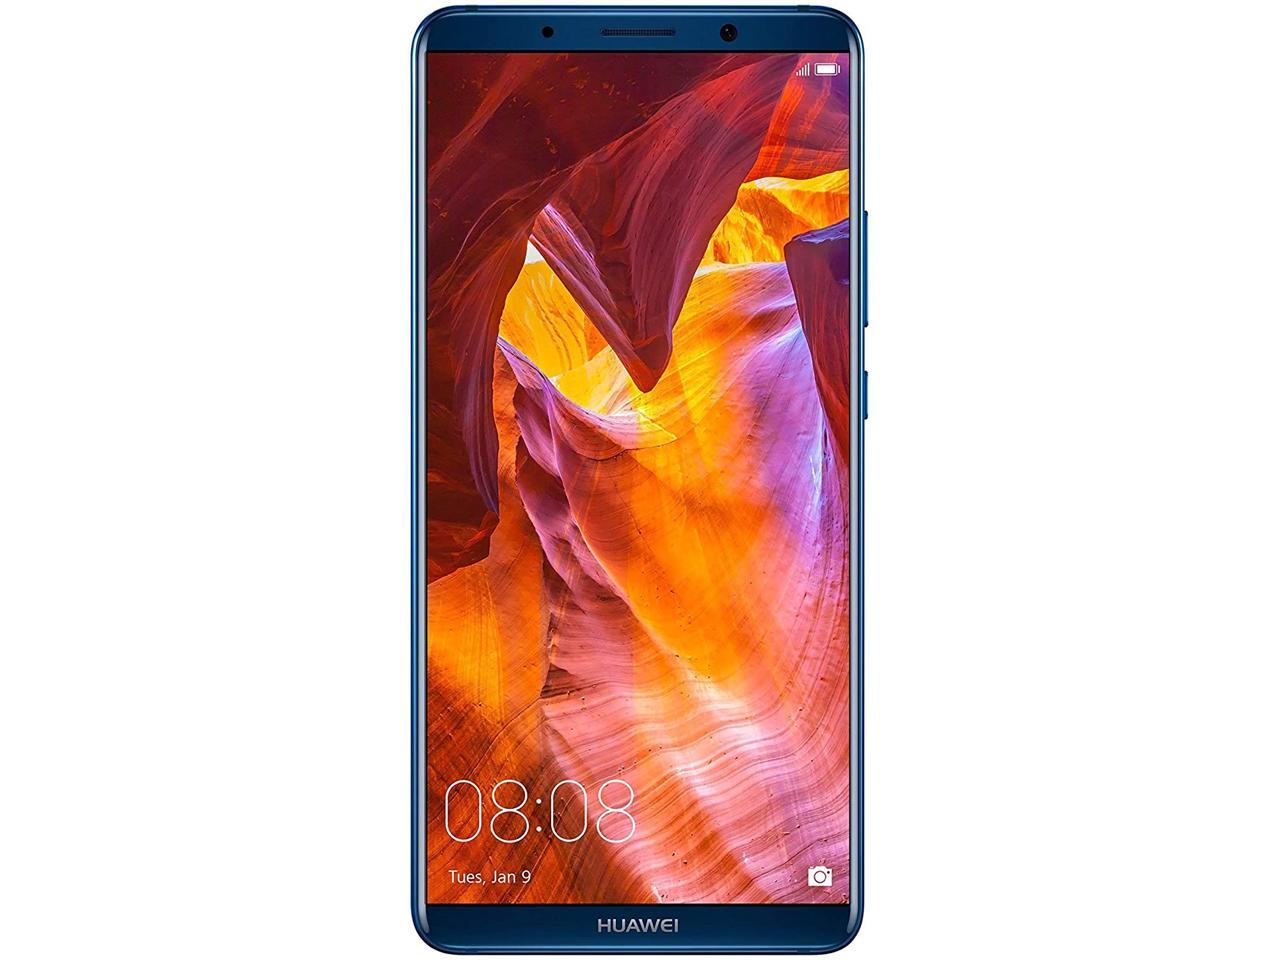 Huawei Mate 10 Pro BLA-A09 128GB GSM Unlocked Android SmartPhone - Midnight Blue